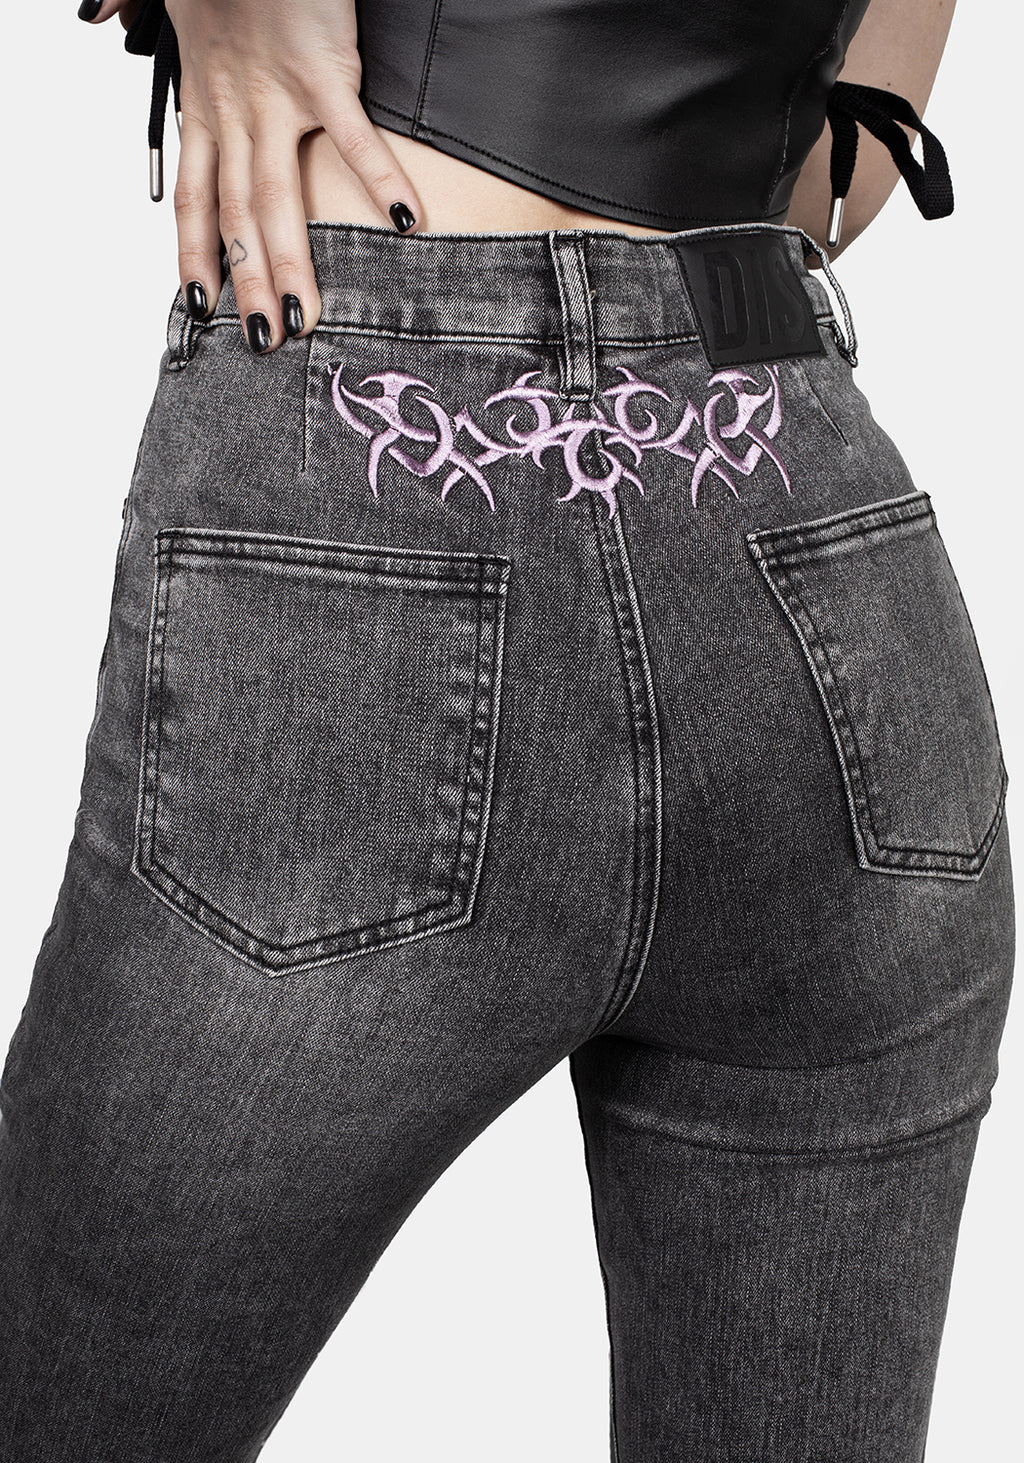 Tramp-Washed-Lace-up-Flared-Jeans – Disturbia